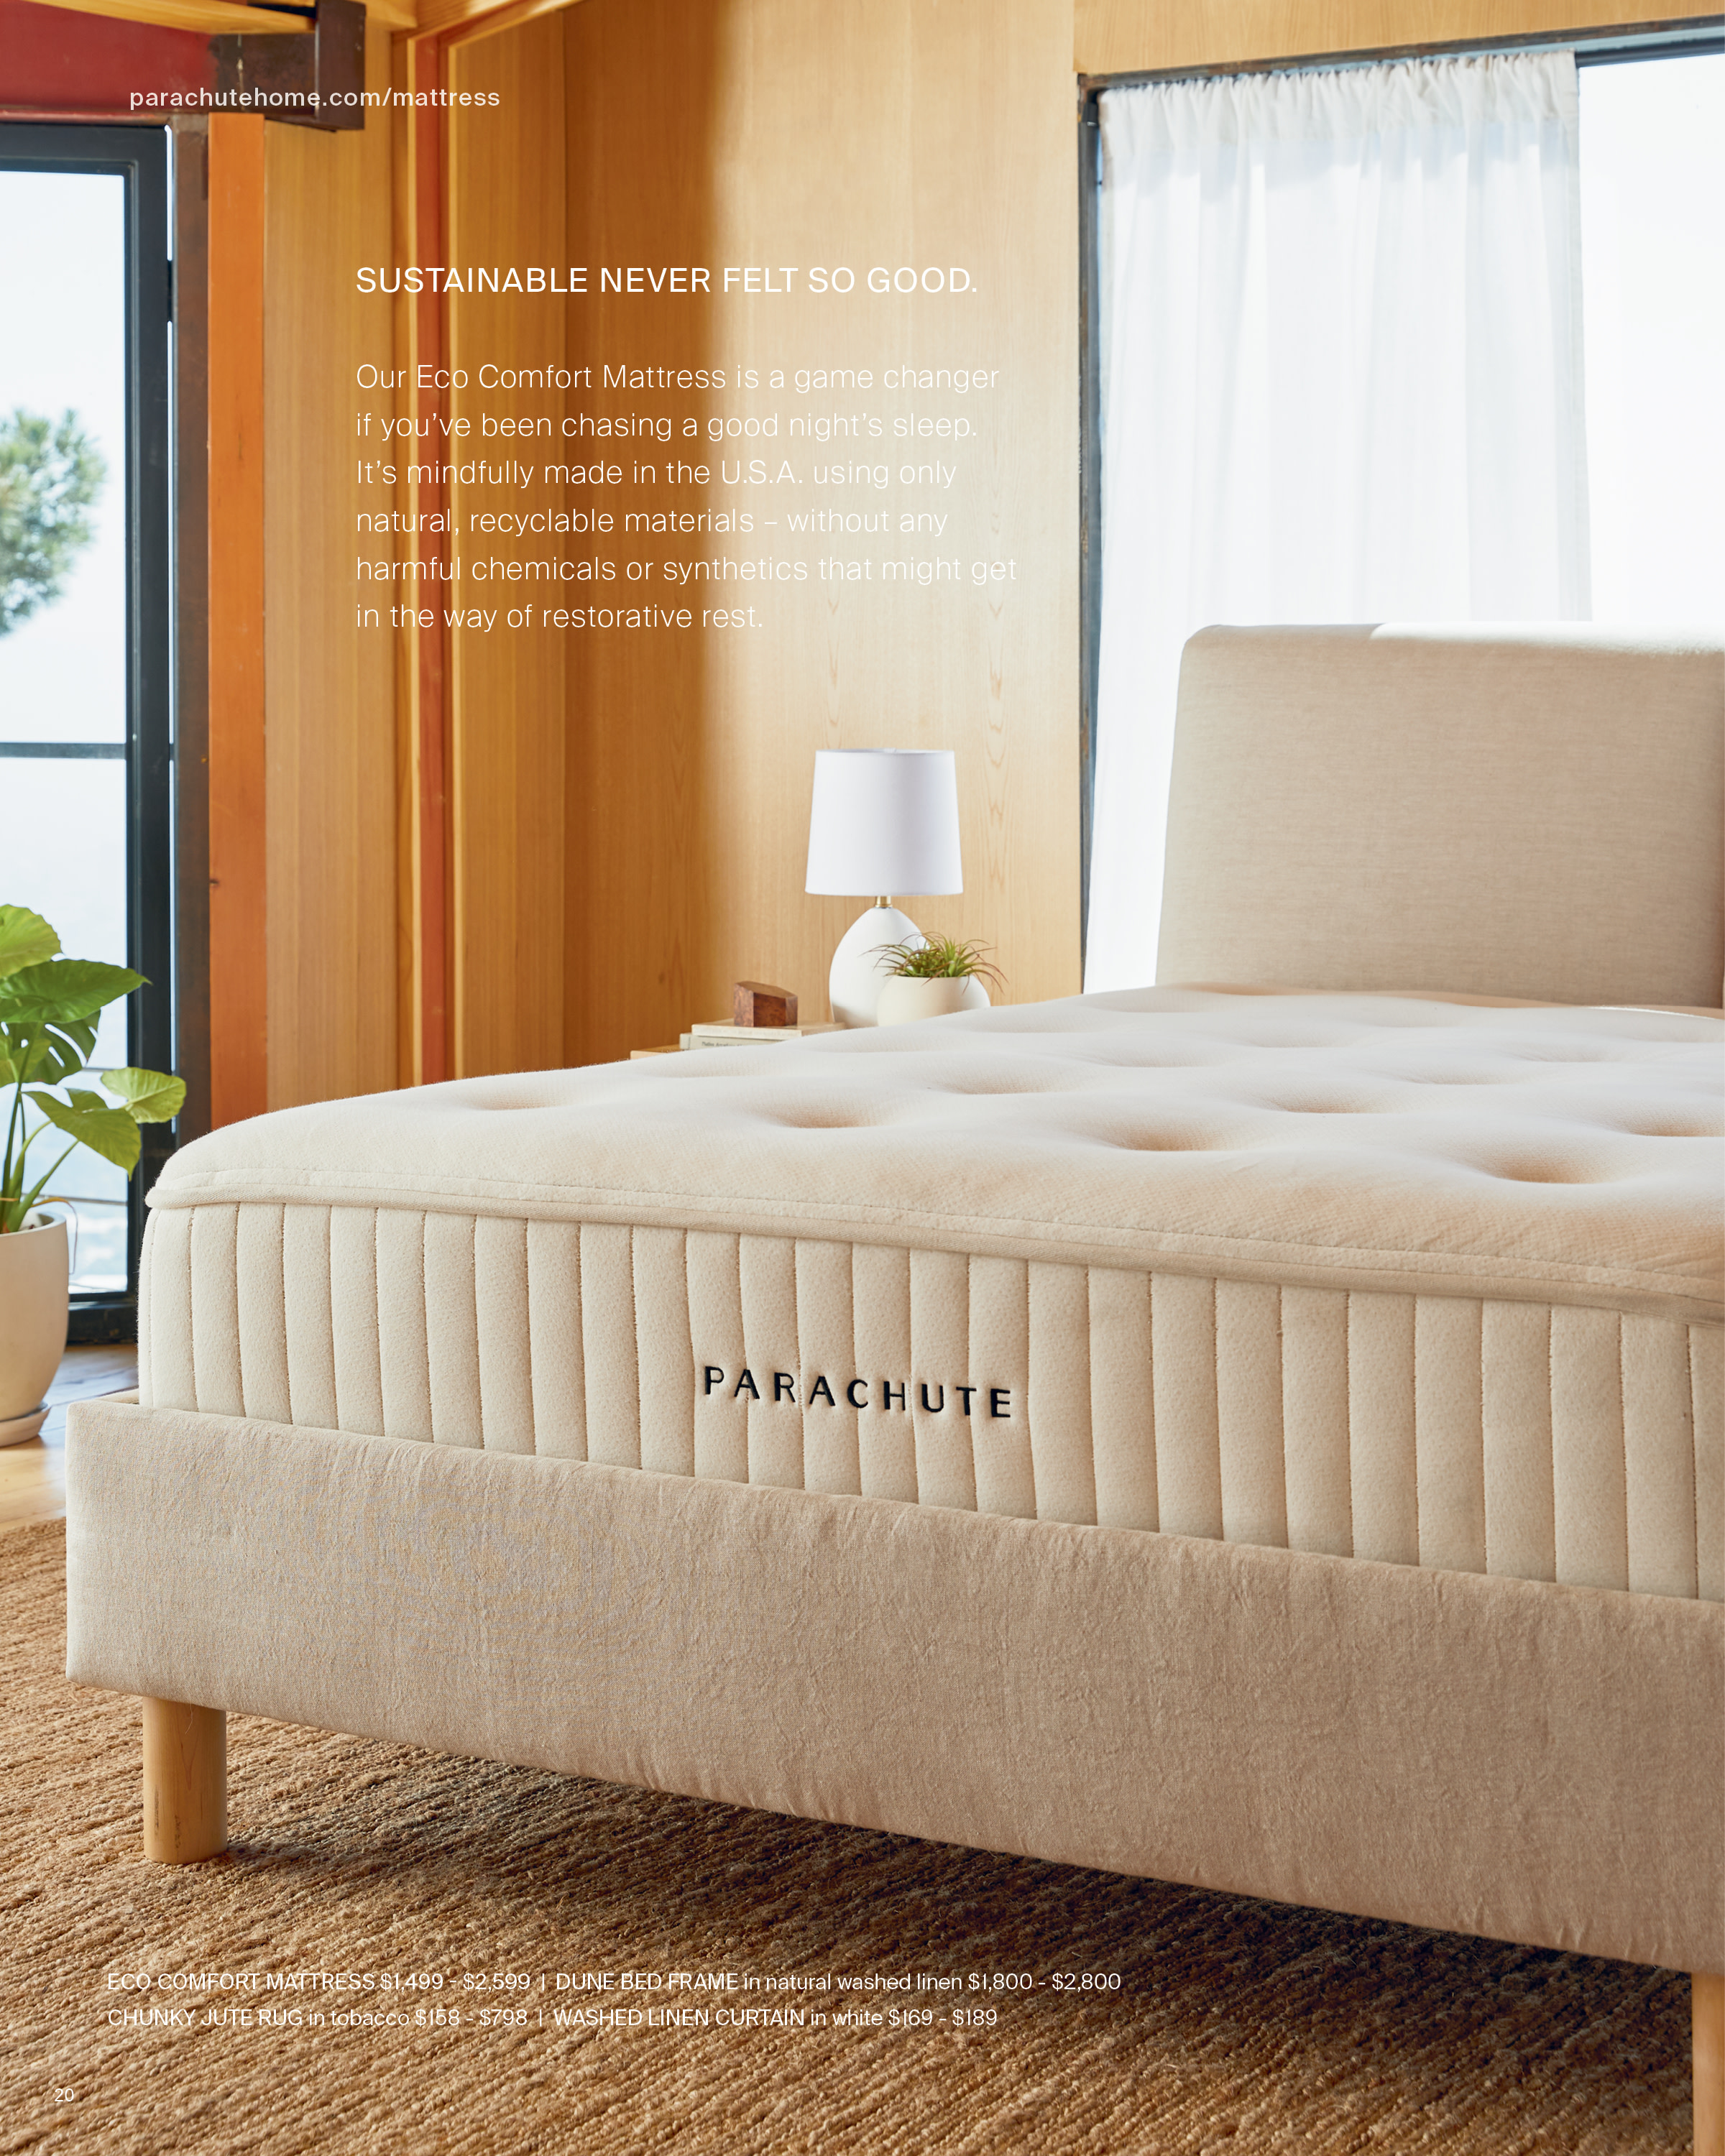 A Parachute mattress on a bed frame in a bright room